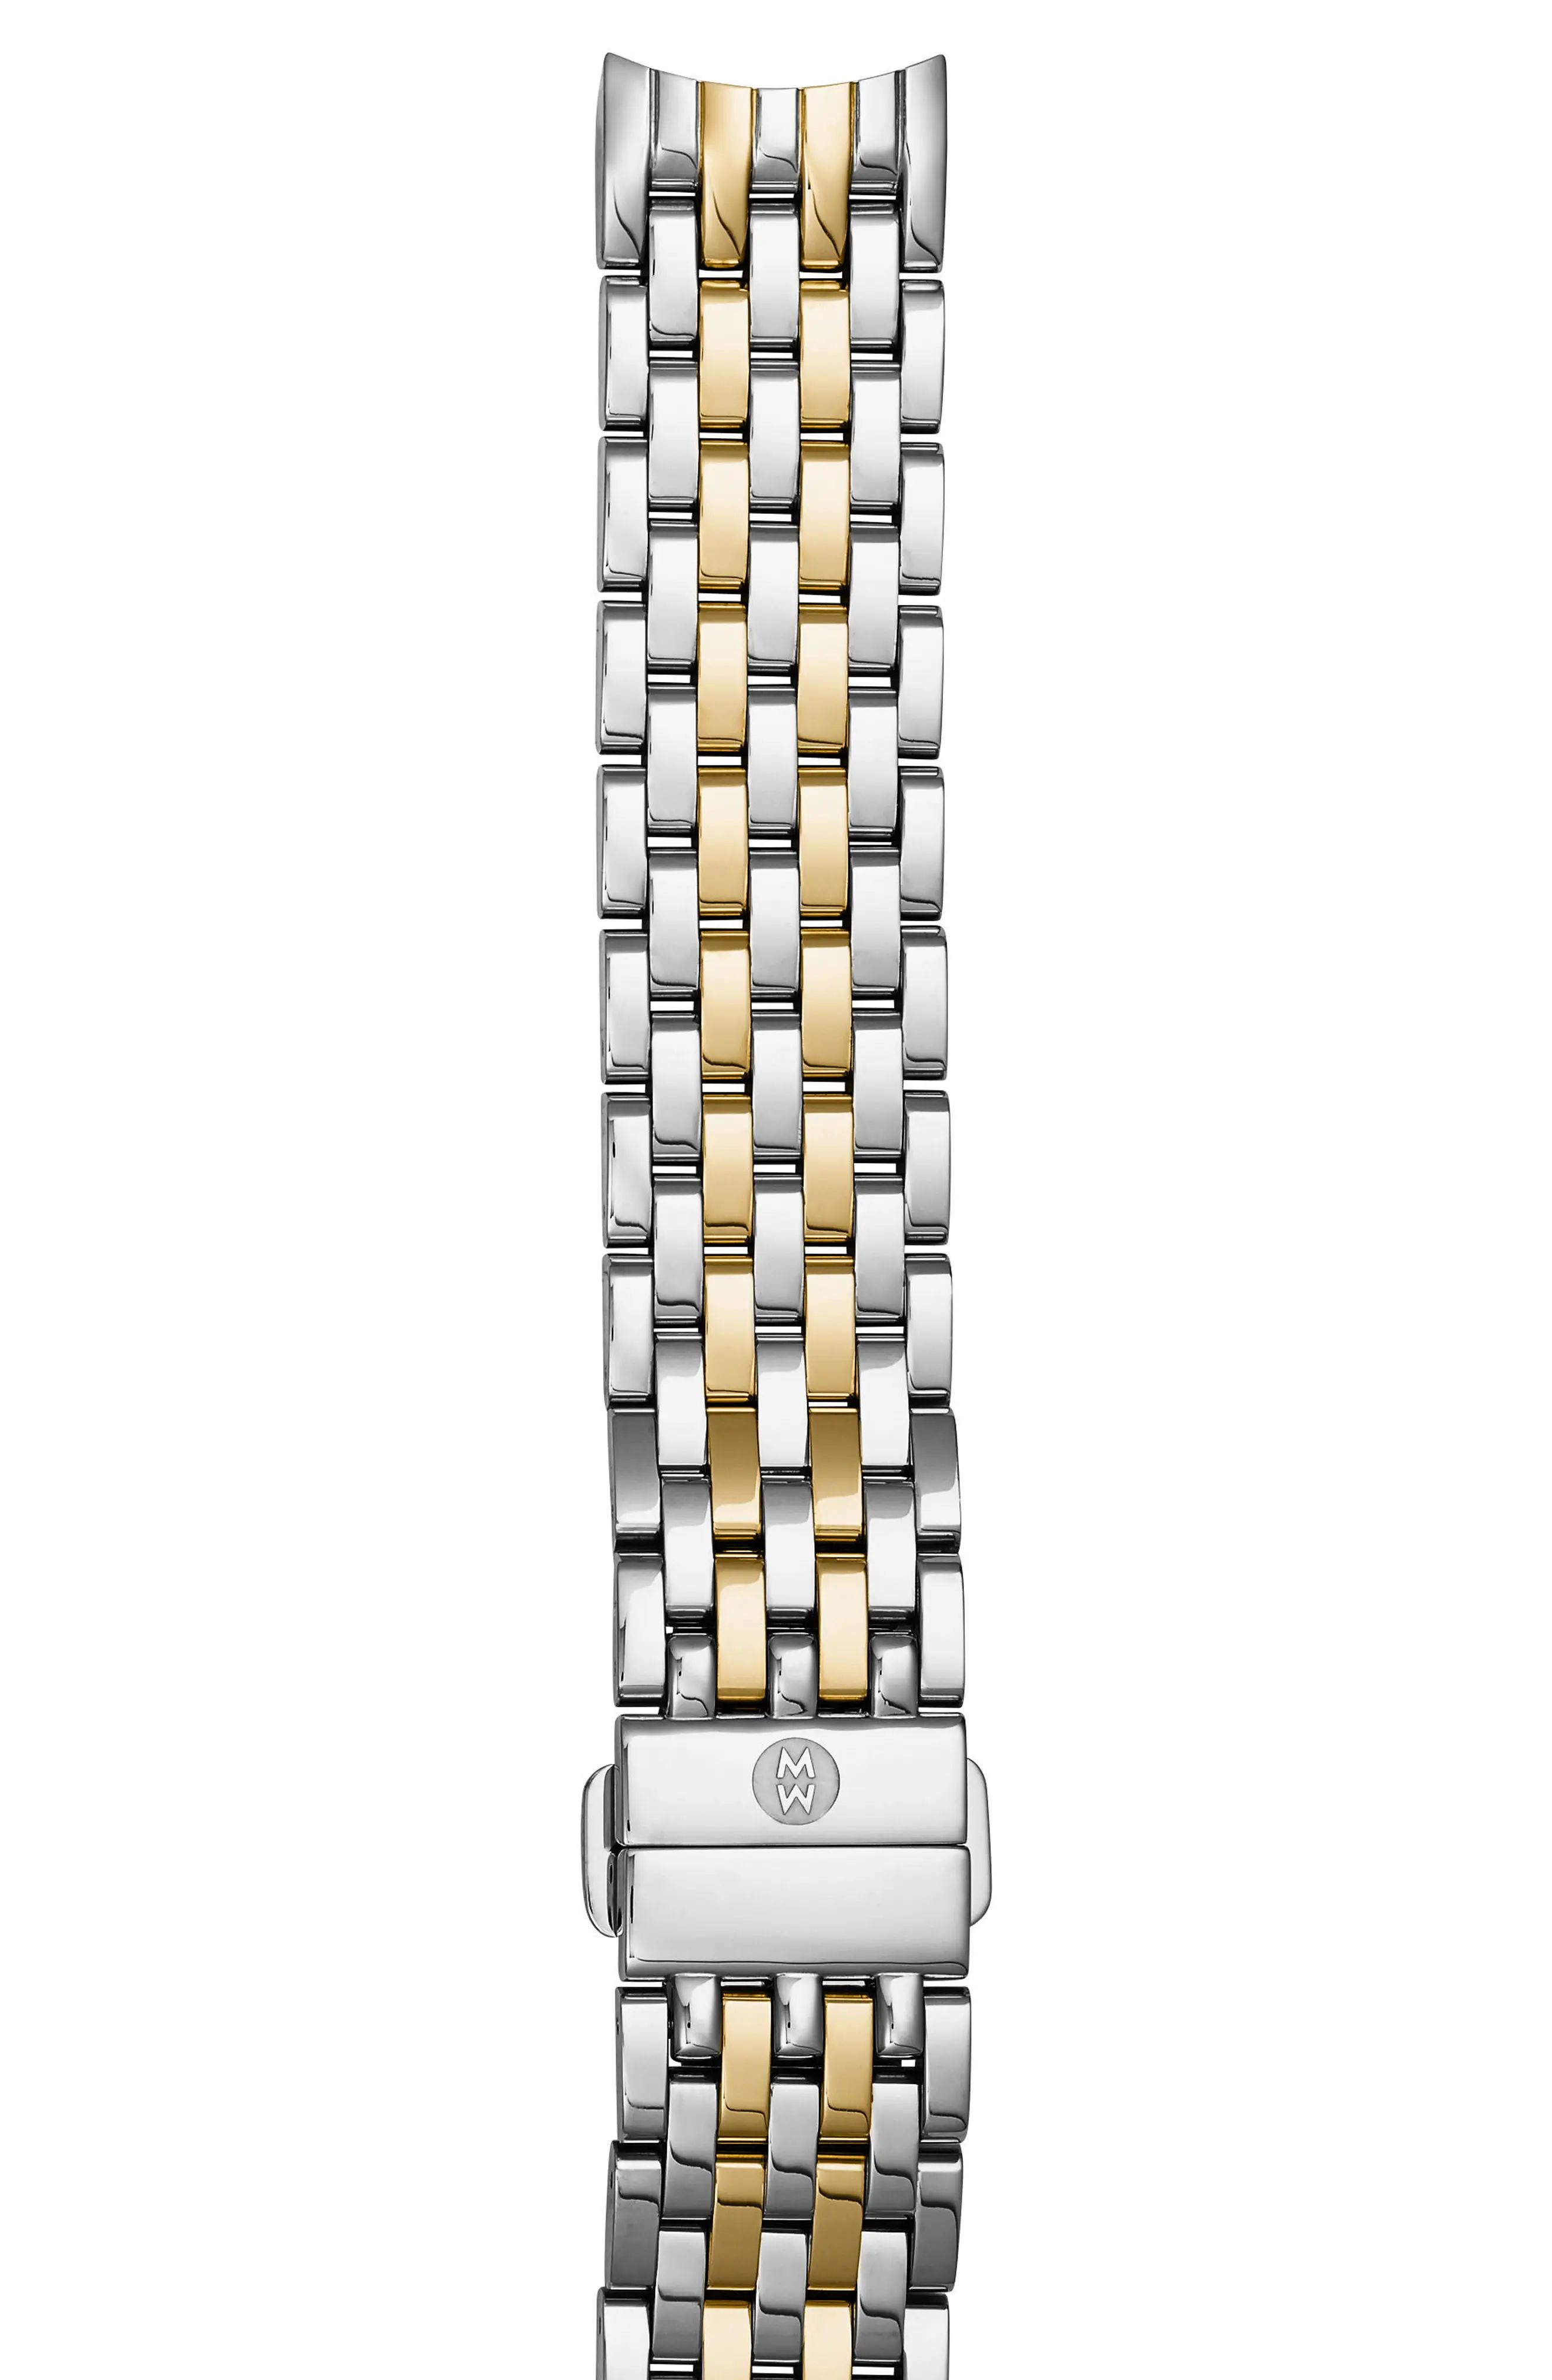 Sidney 18mm Stainless Steel Bracelet Watch Band | Nordstrom